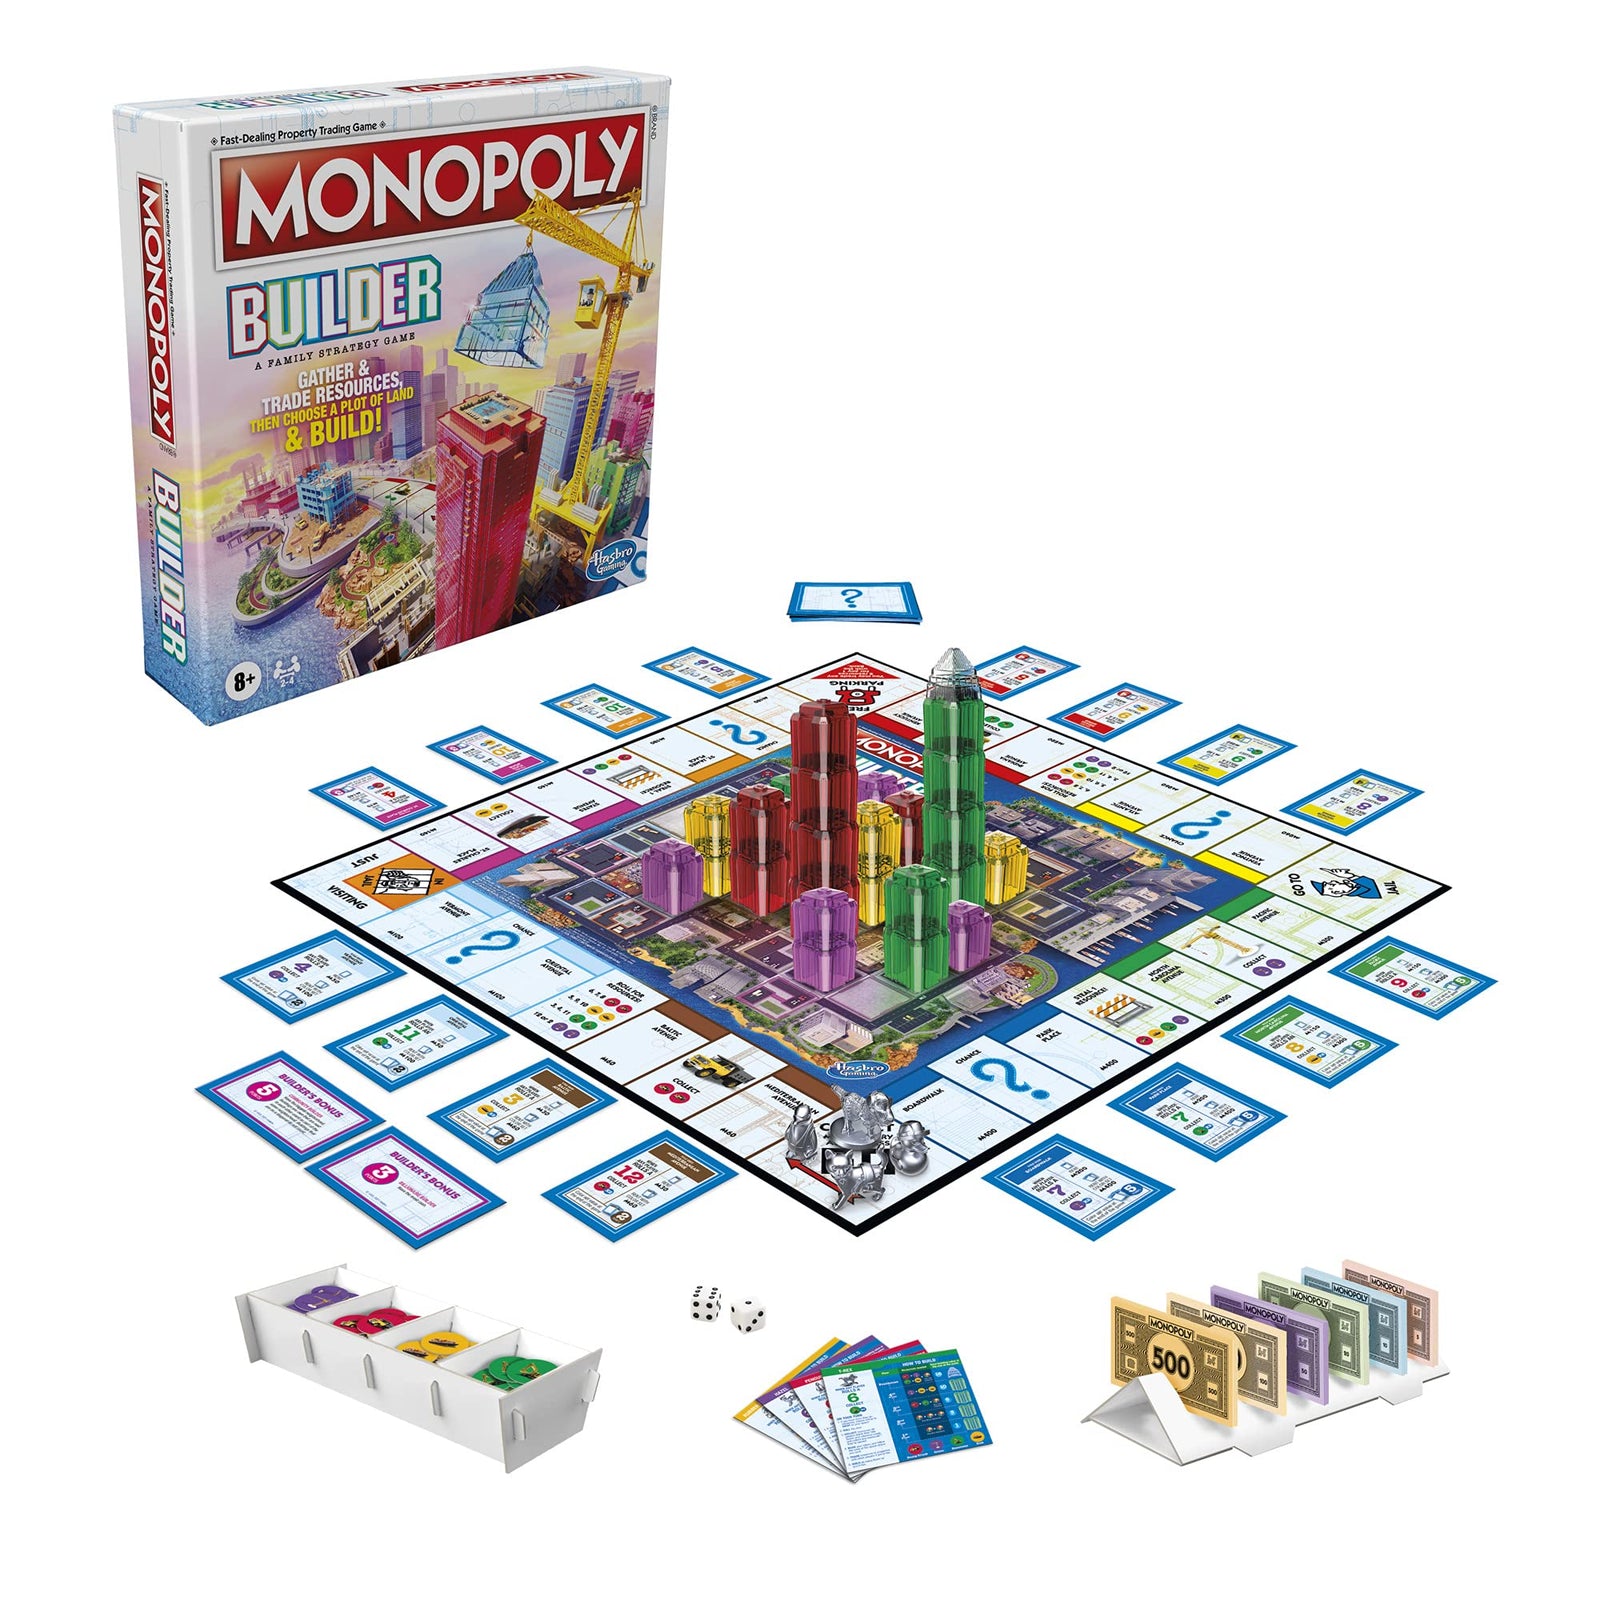 Monopoly Builder Board Game, Strategy Game, Family Game, Games for Kids, Fun Game to Play, Family Board Games, Ages 8 and up